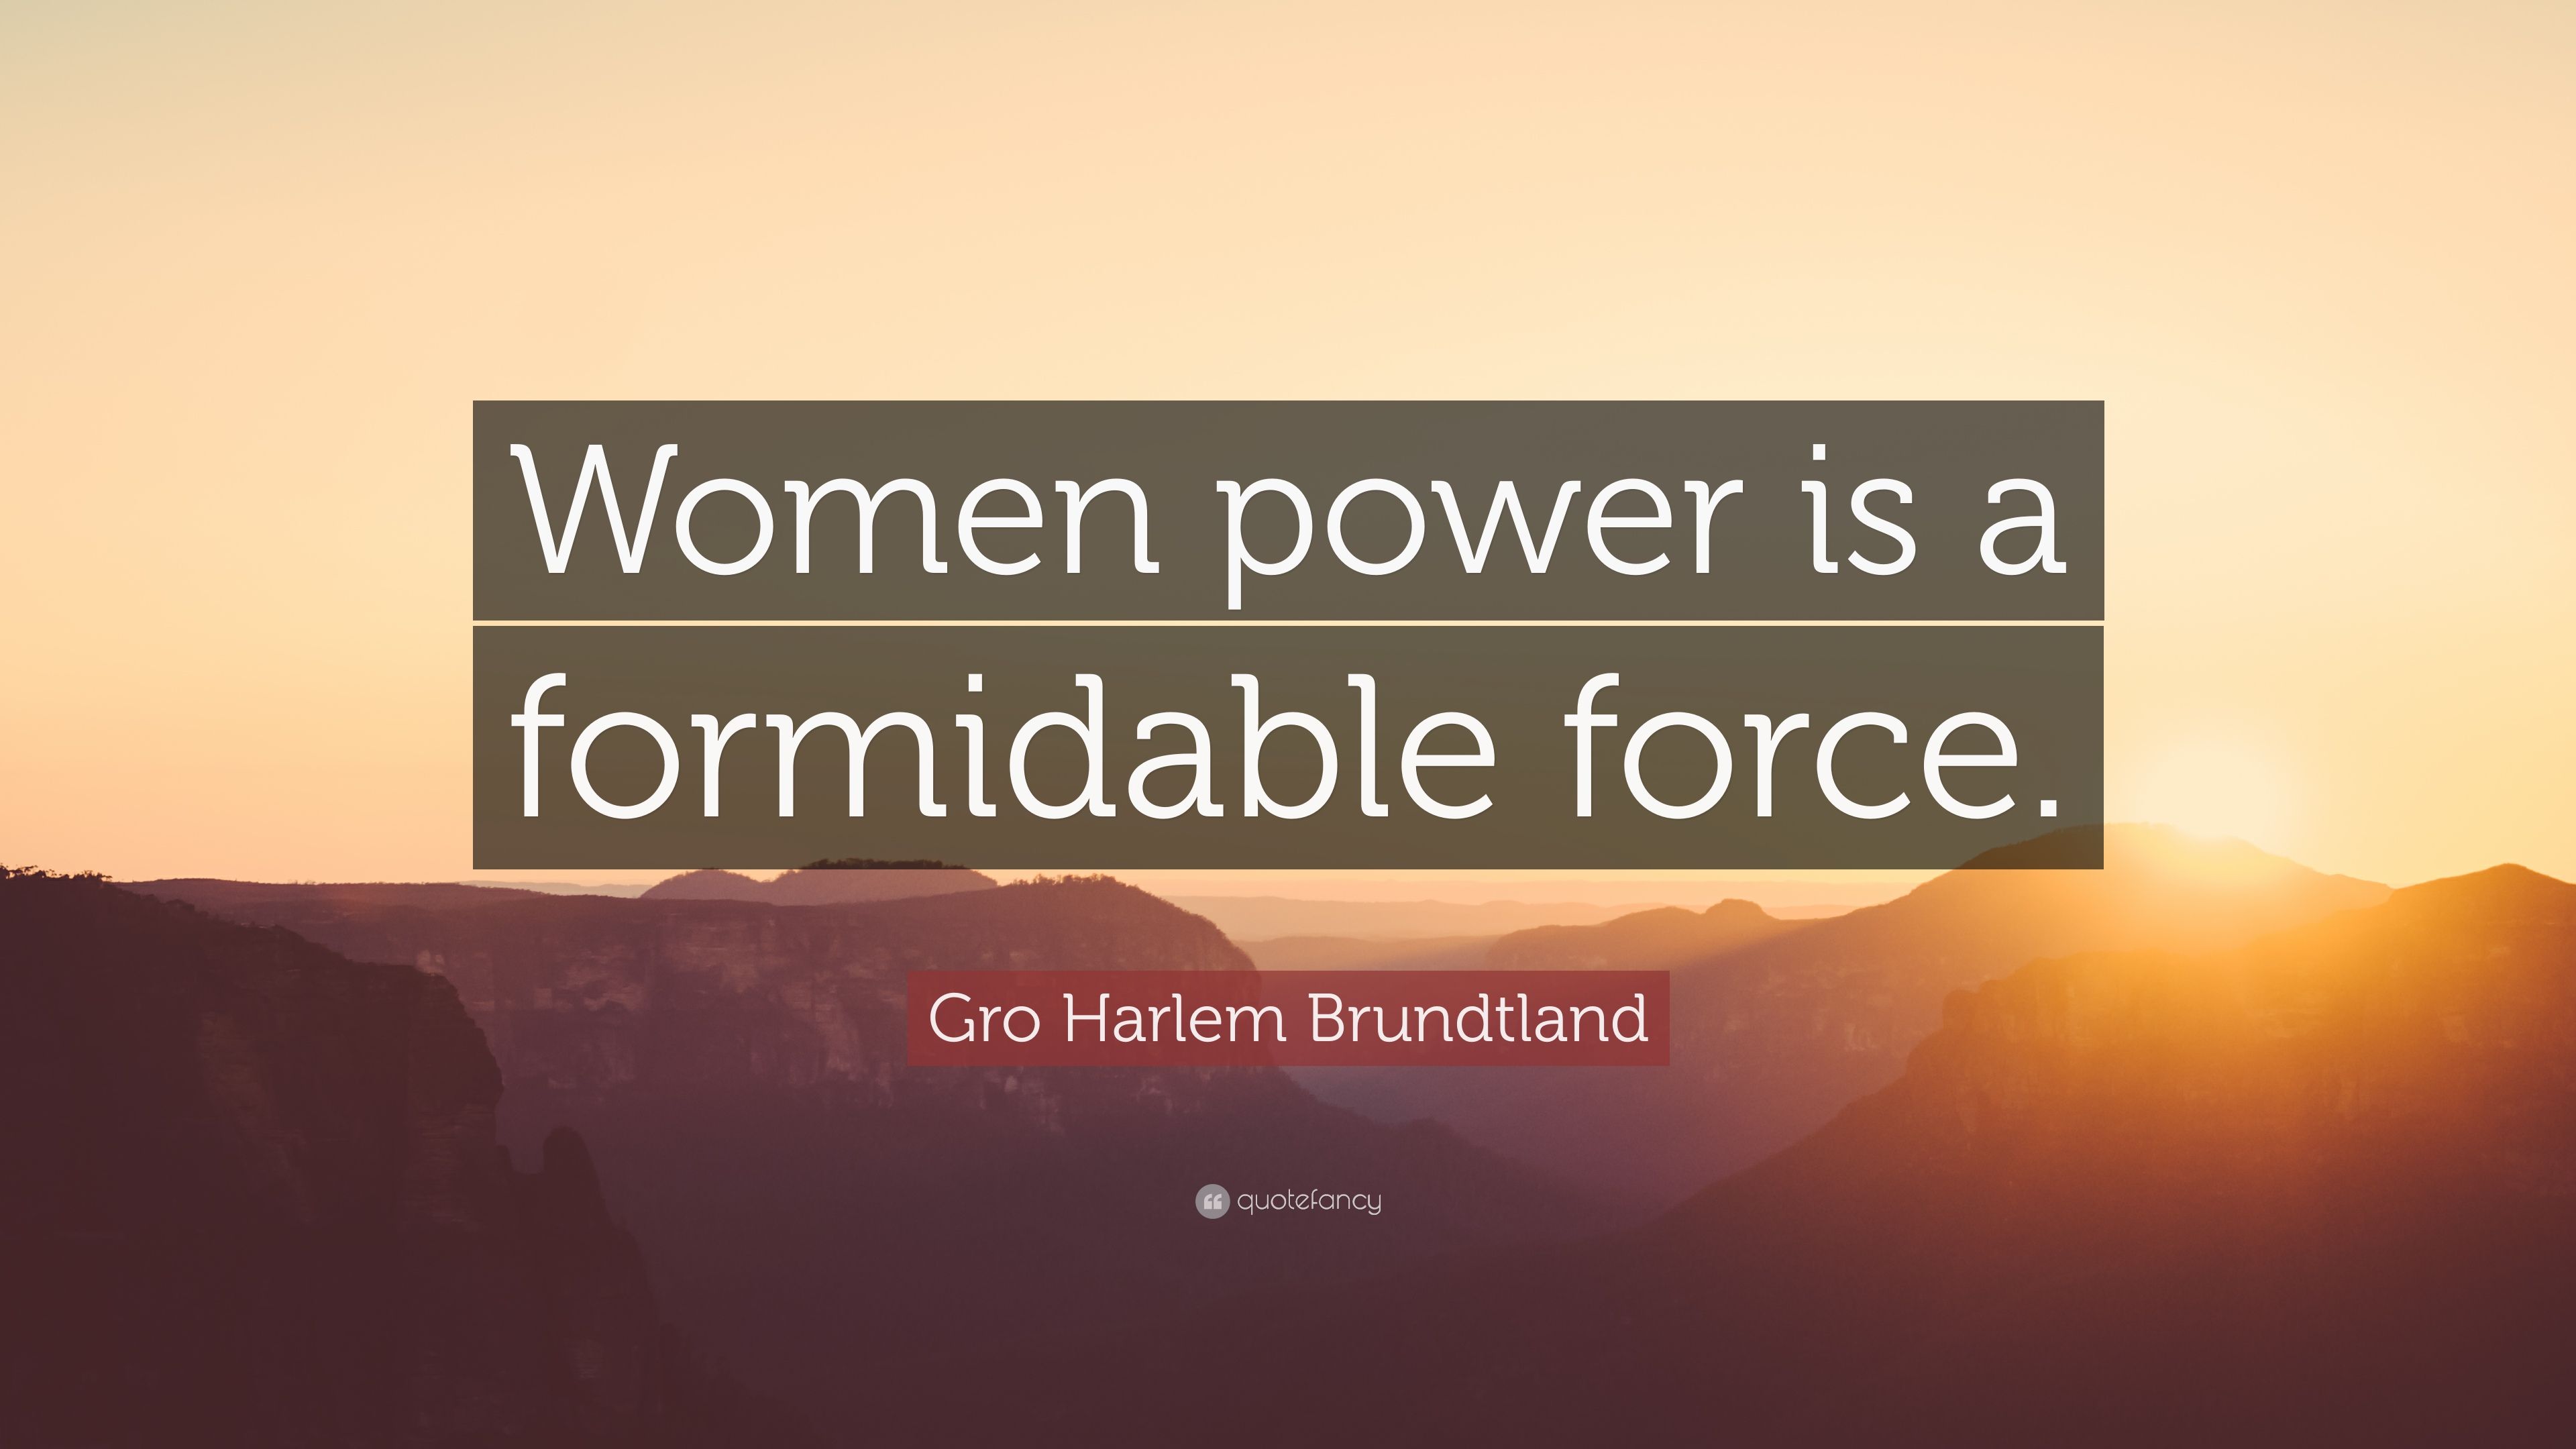 Gro Harlem Brundtland Quote: “Women power is a formidable force